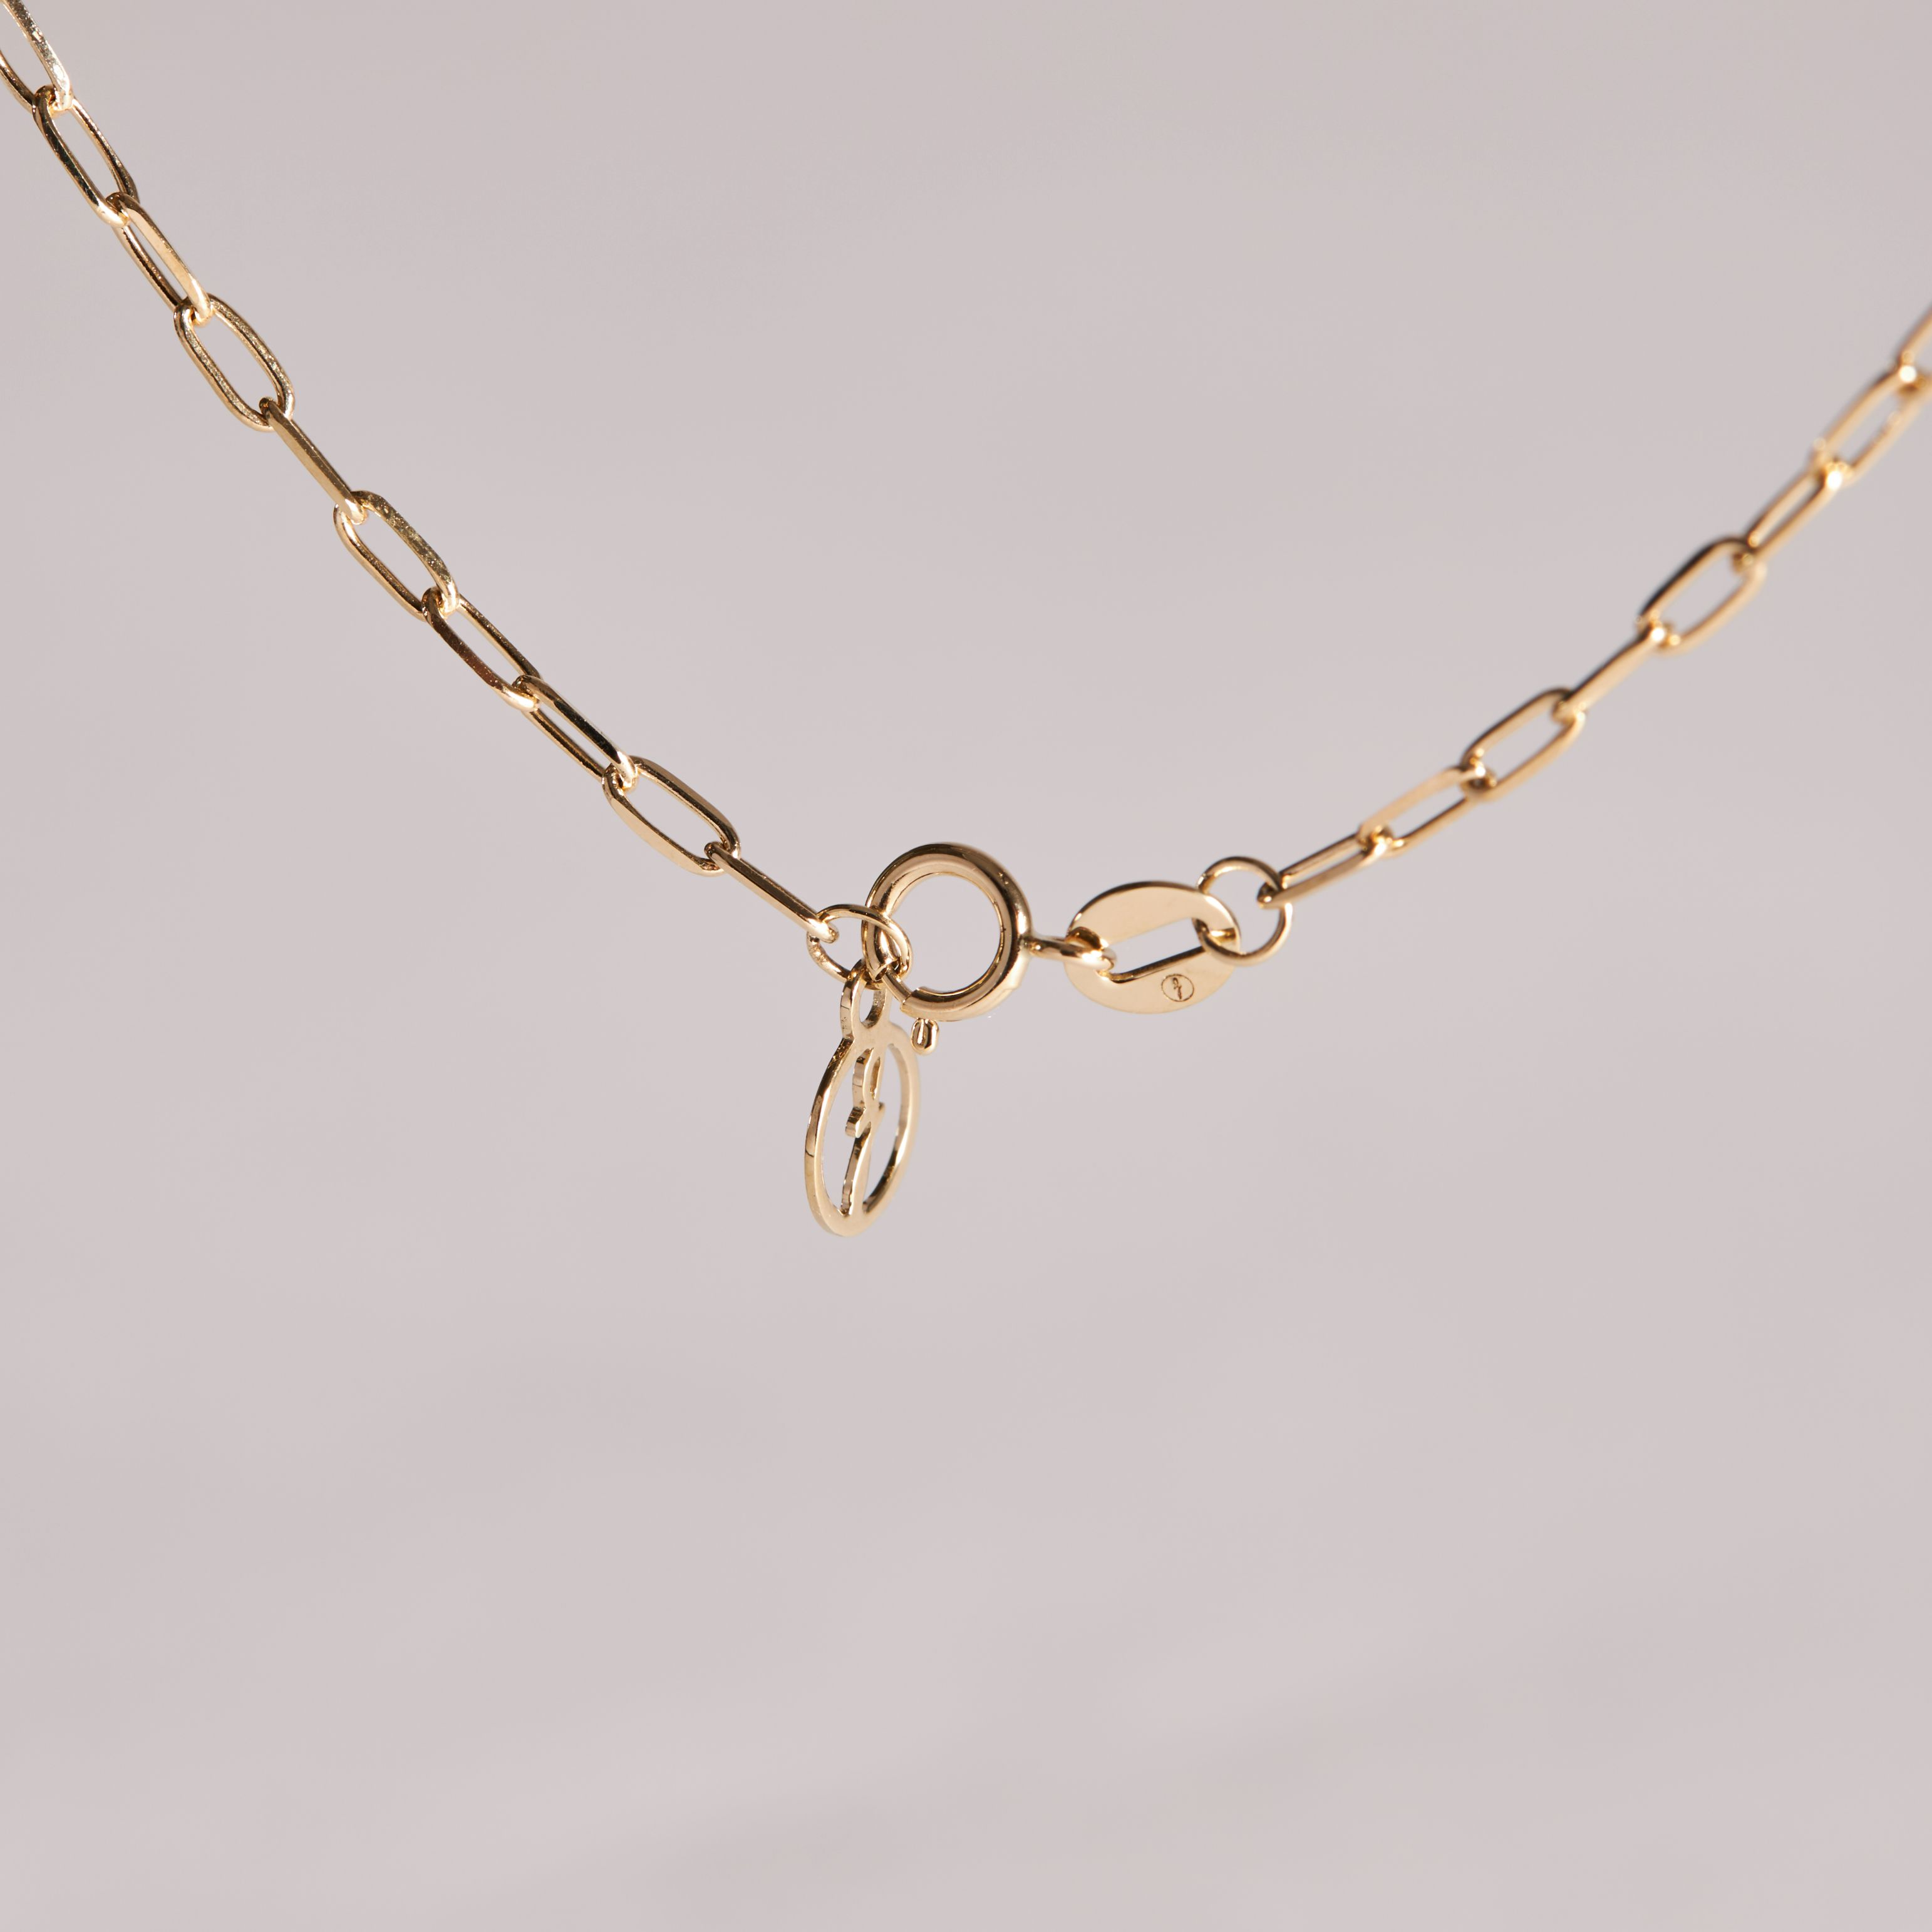 VENICE REAL GOLD EXTRA LONG CHAIN NECKLACE